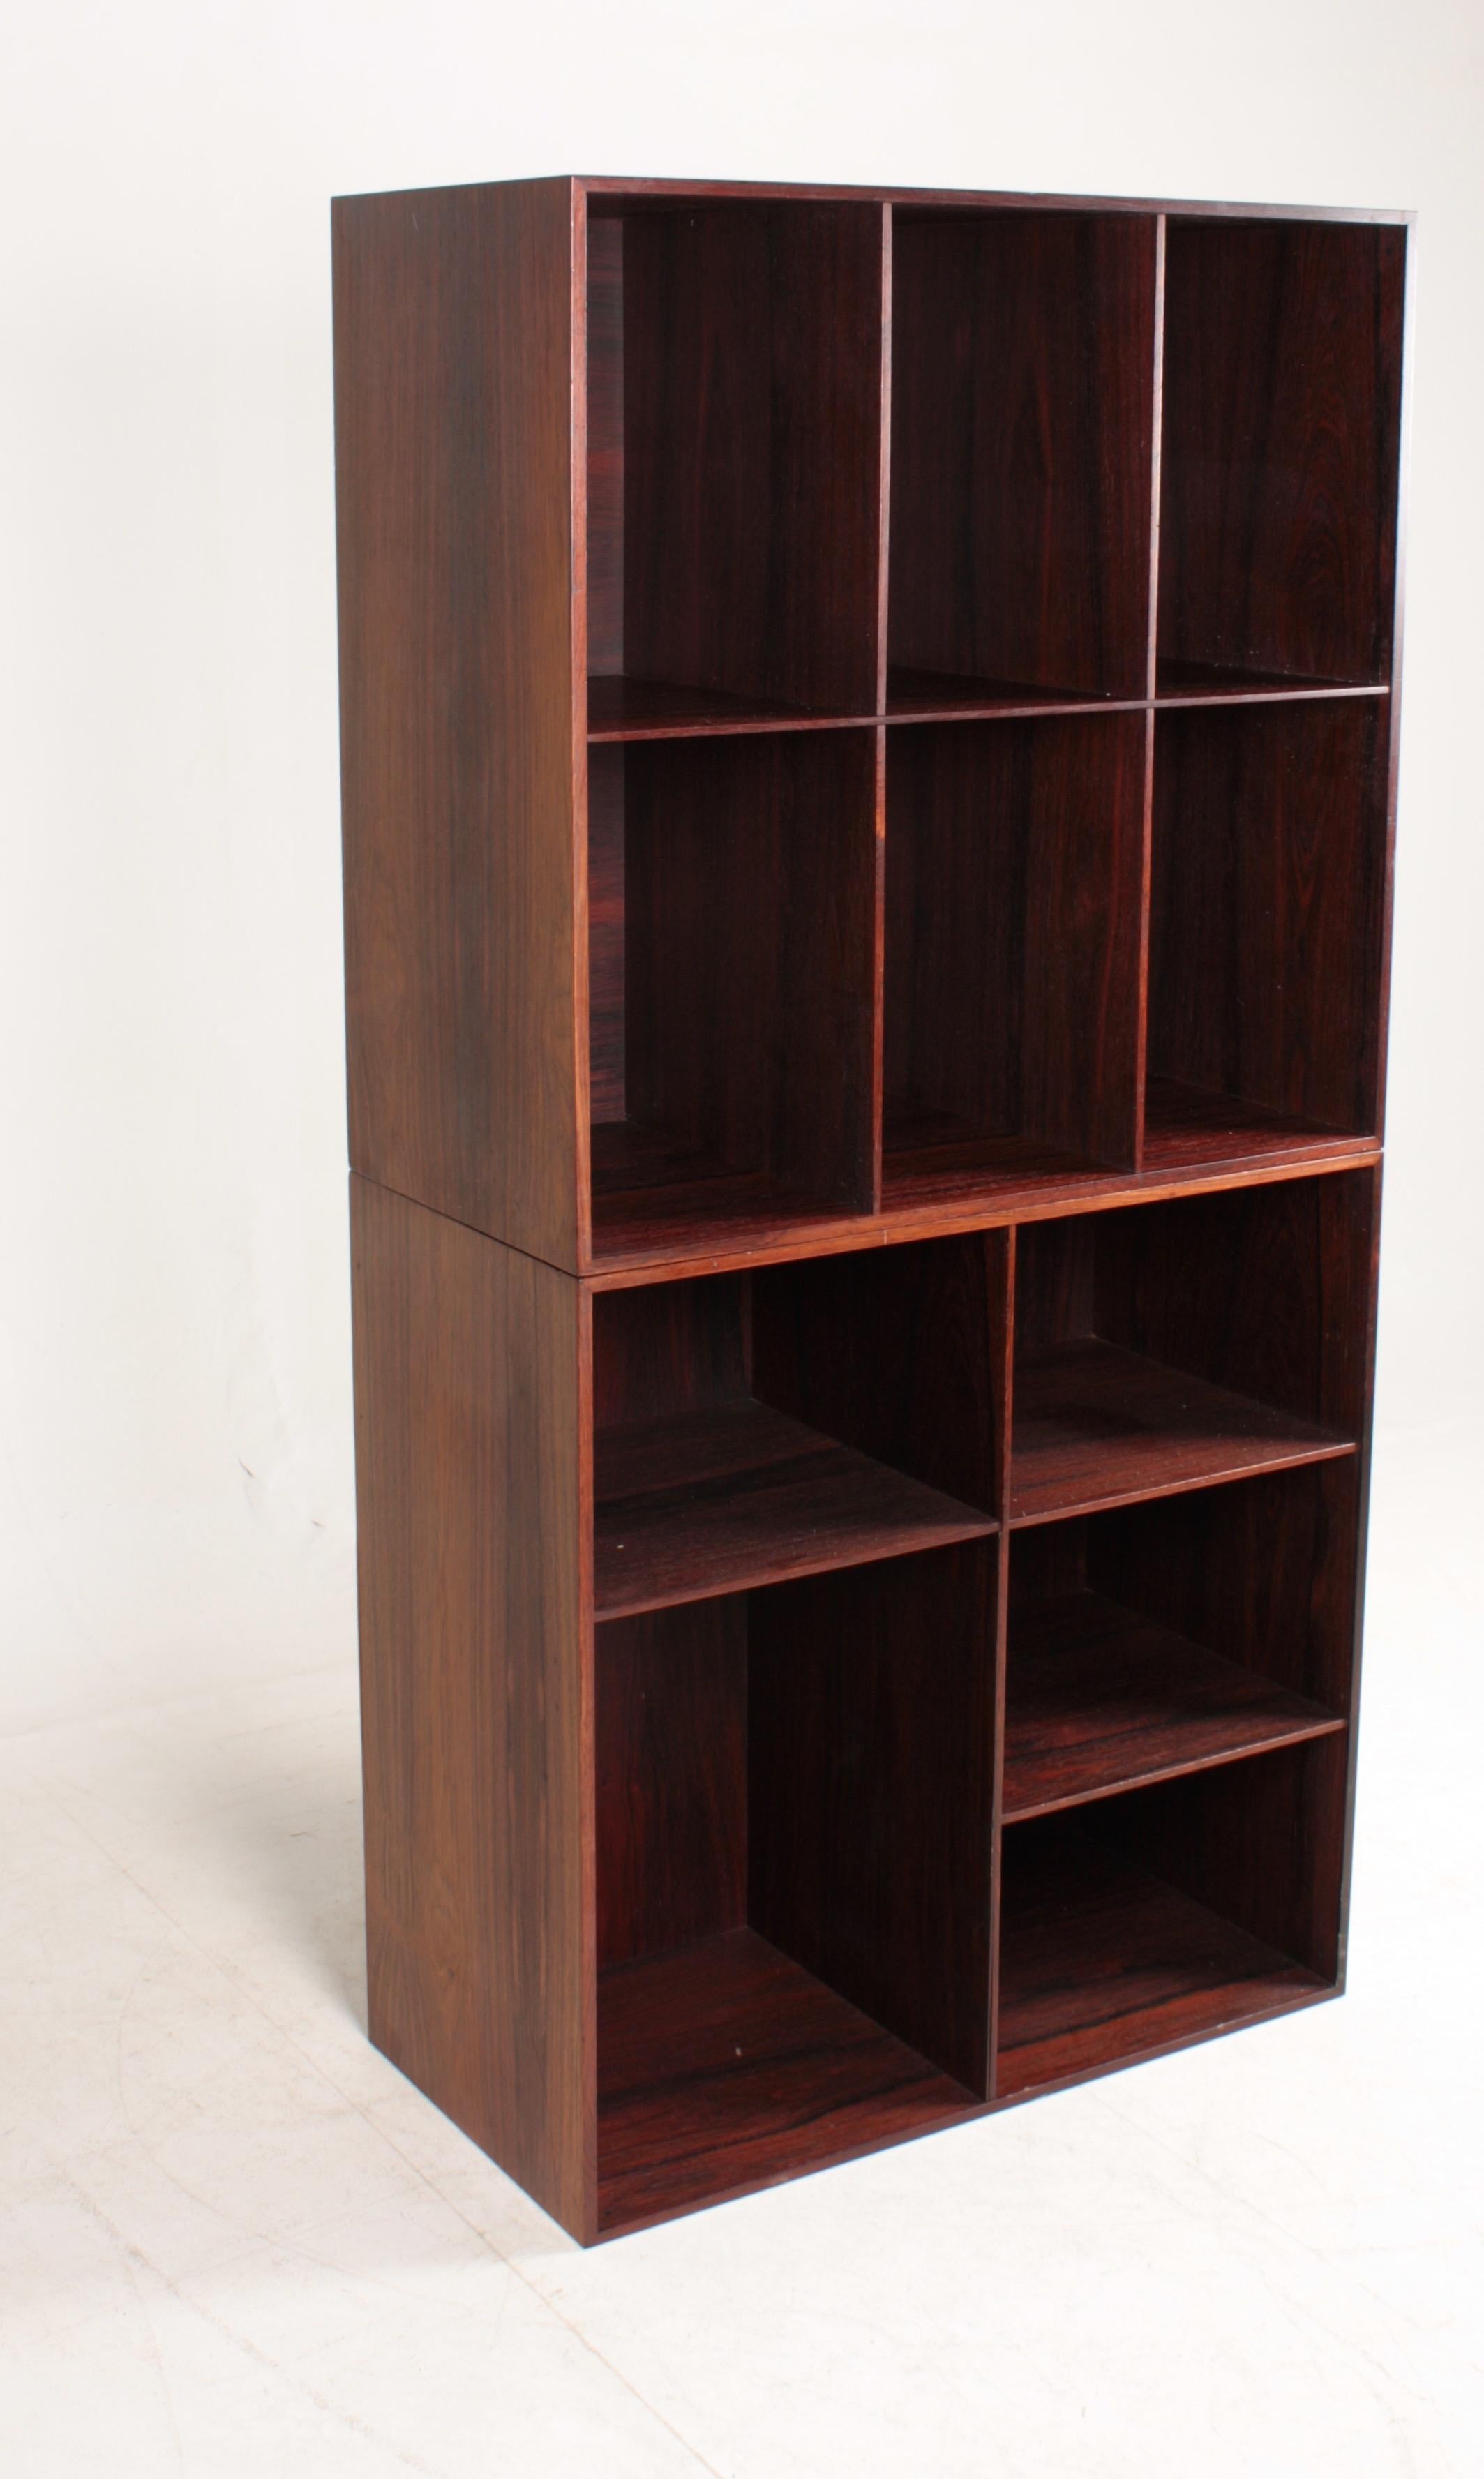 Pair of Bookcases in Rosewood by Mogens Koch, Danish Design, Mid-Century, 1950s For Sale 4